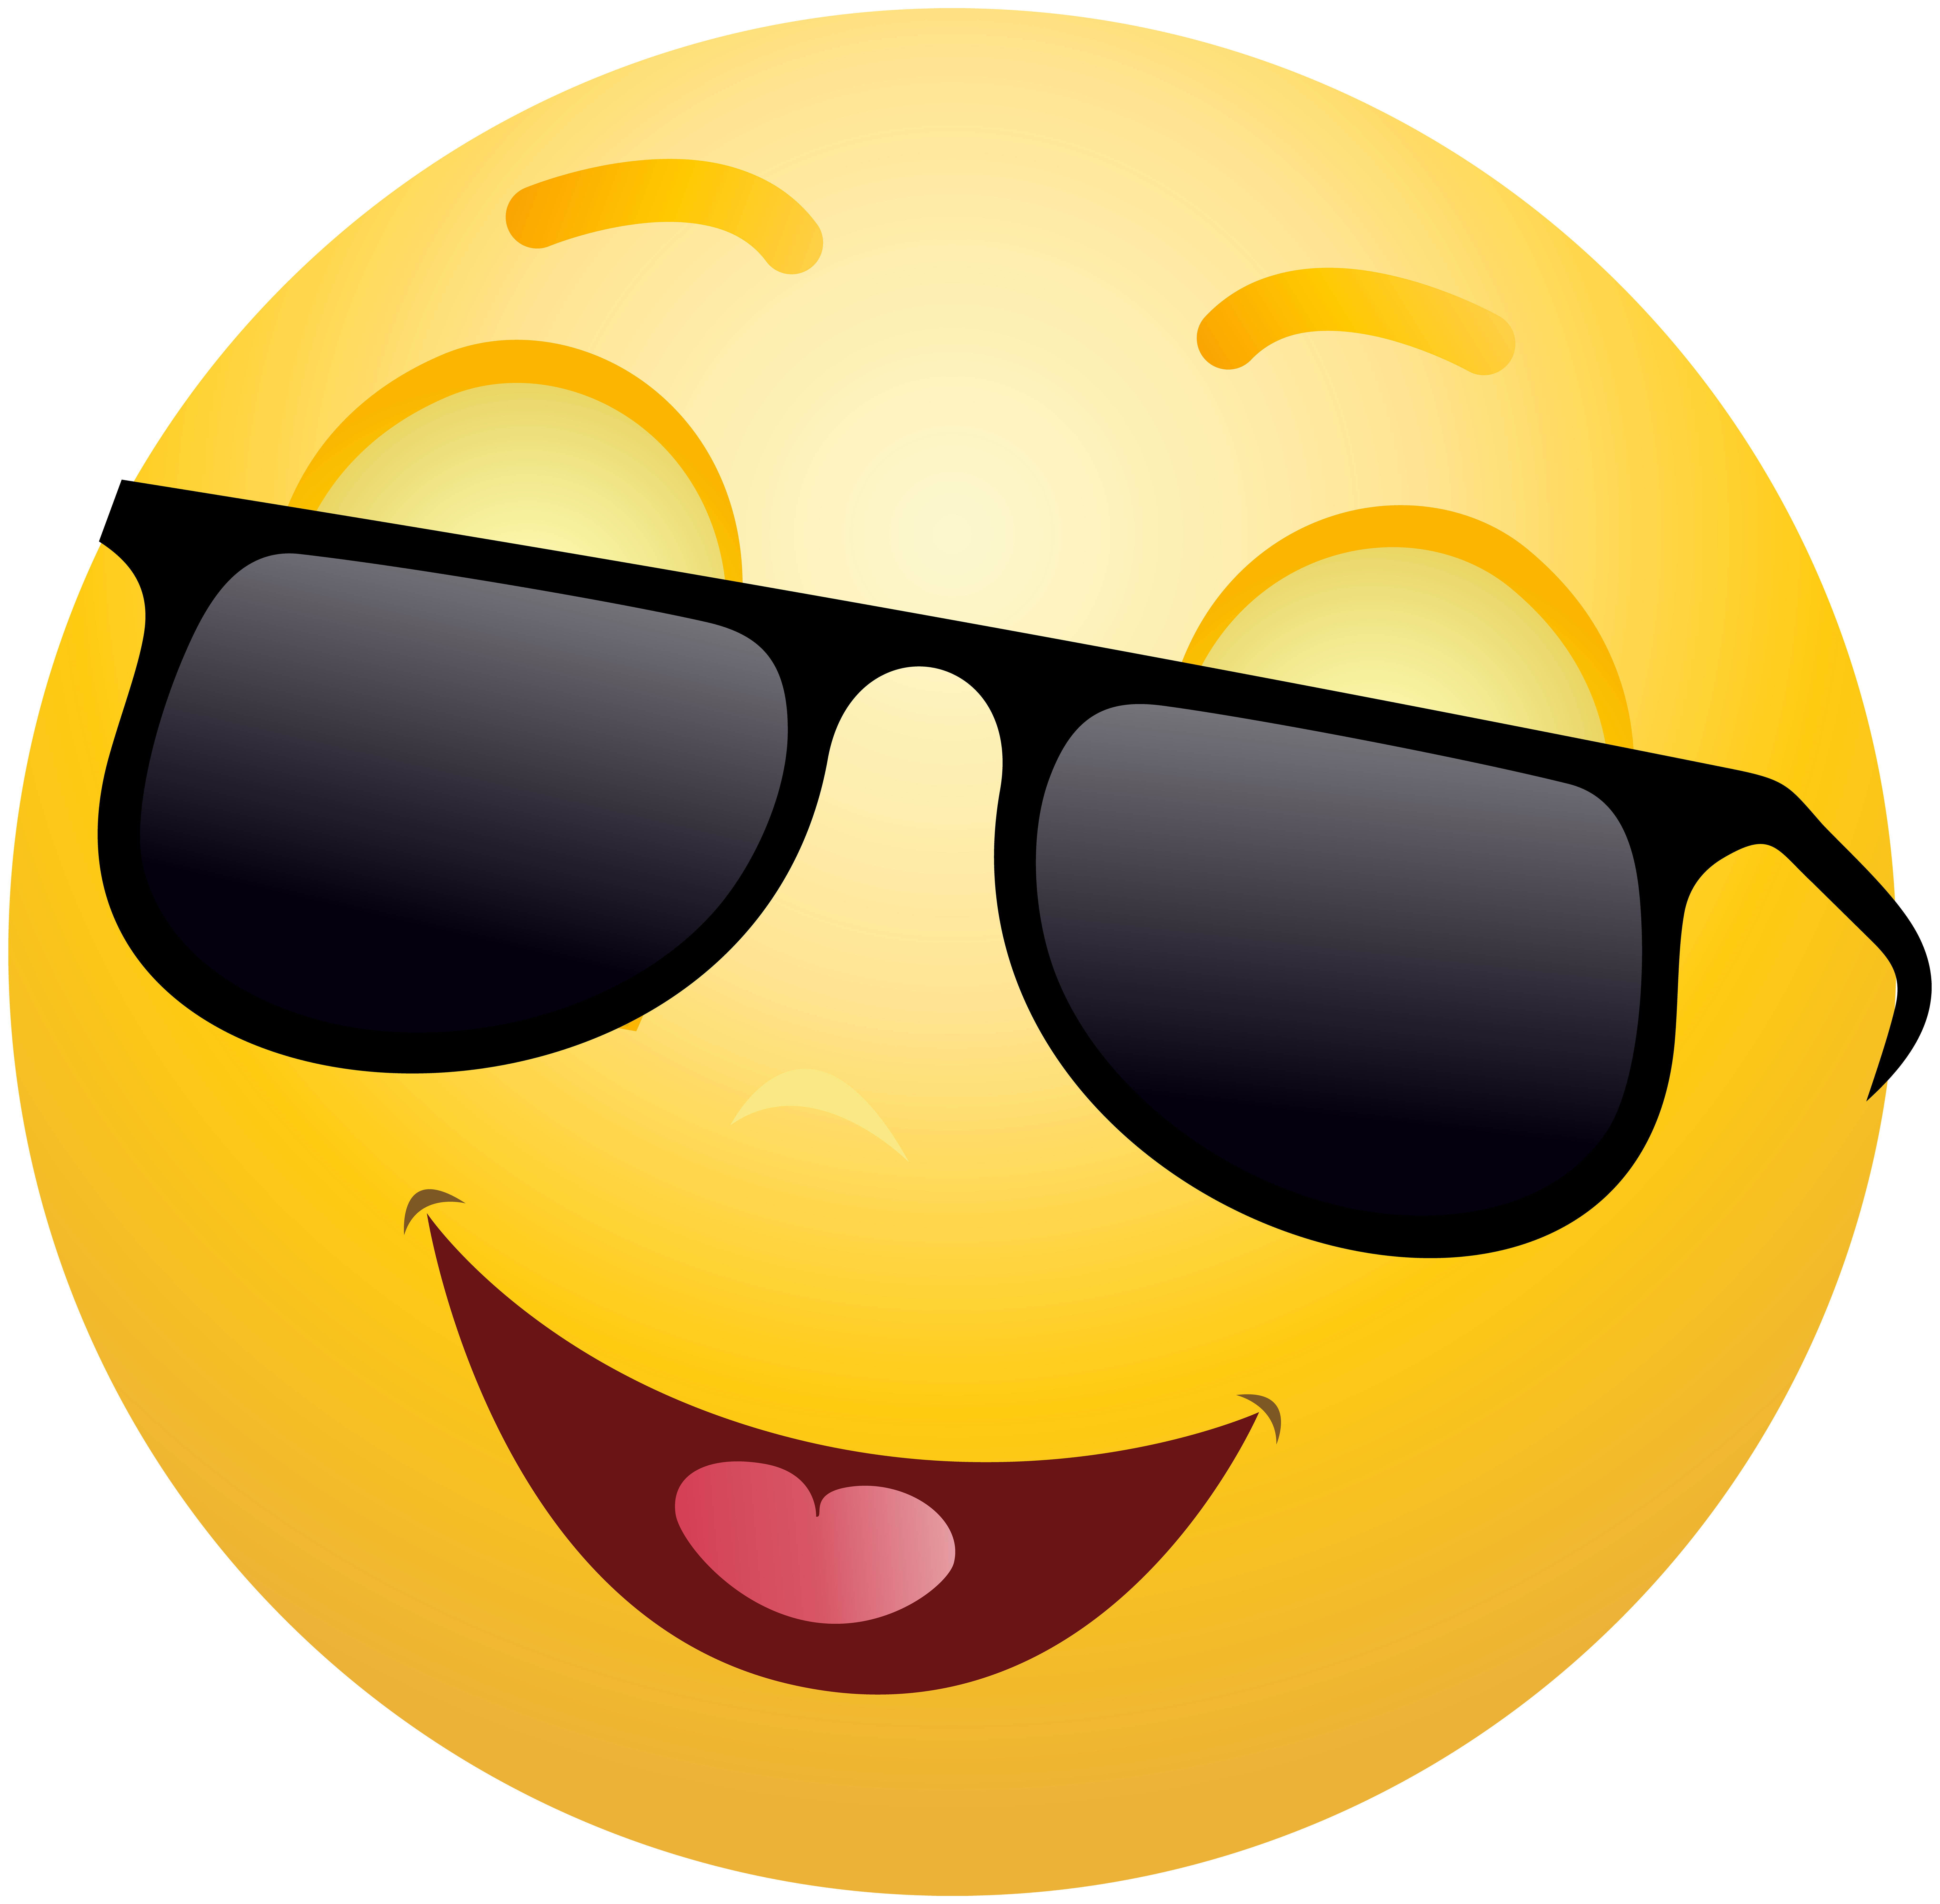 Download Smiling Emoticon with Sunglasses PNG Clip Art - Best WEB ...